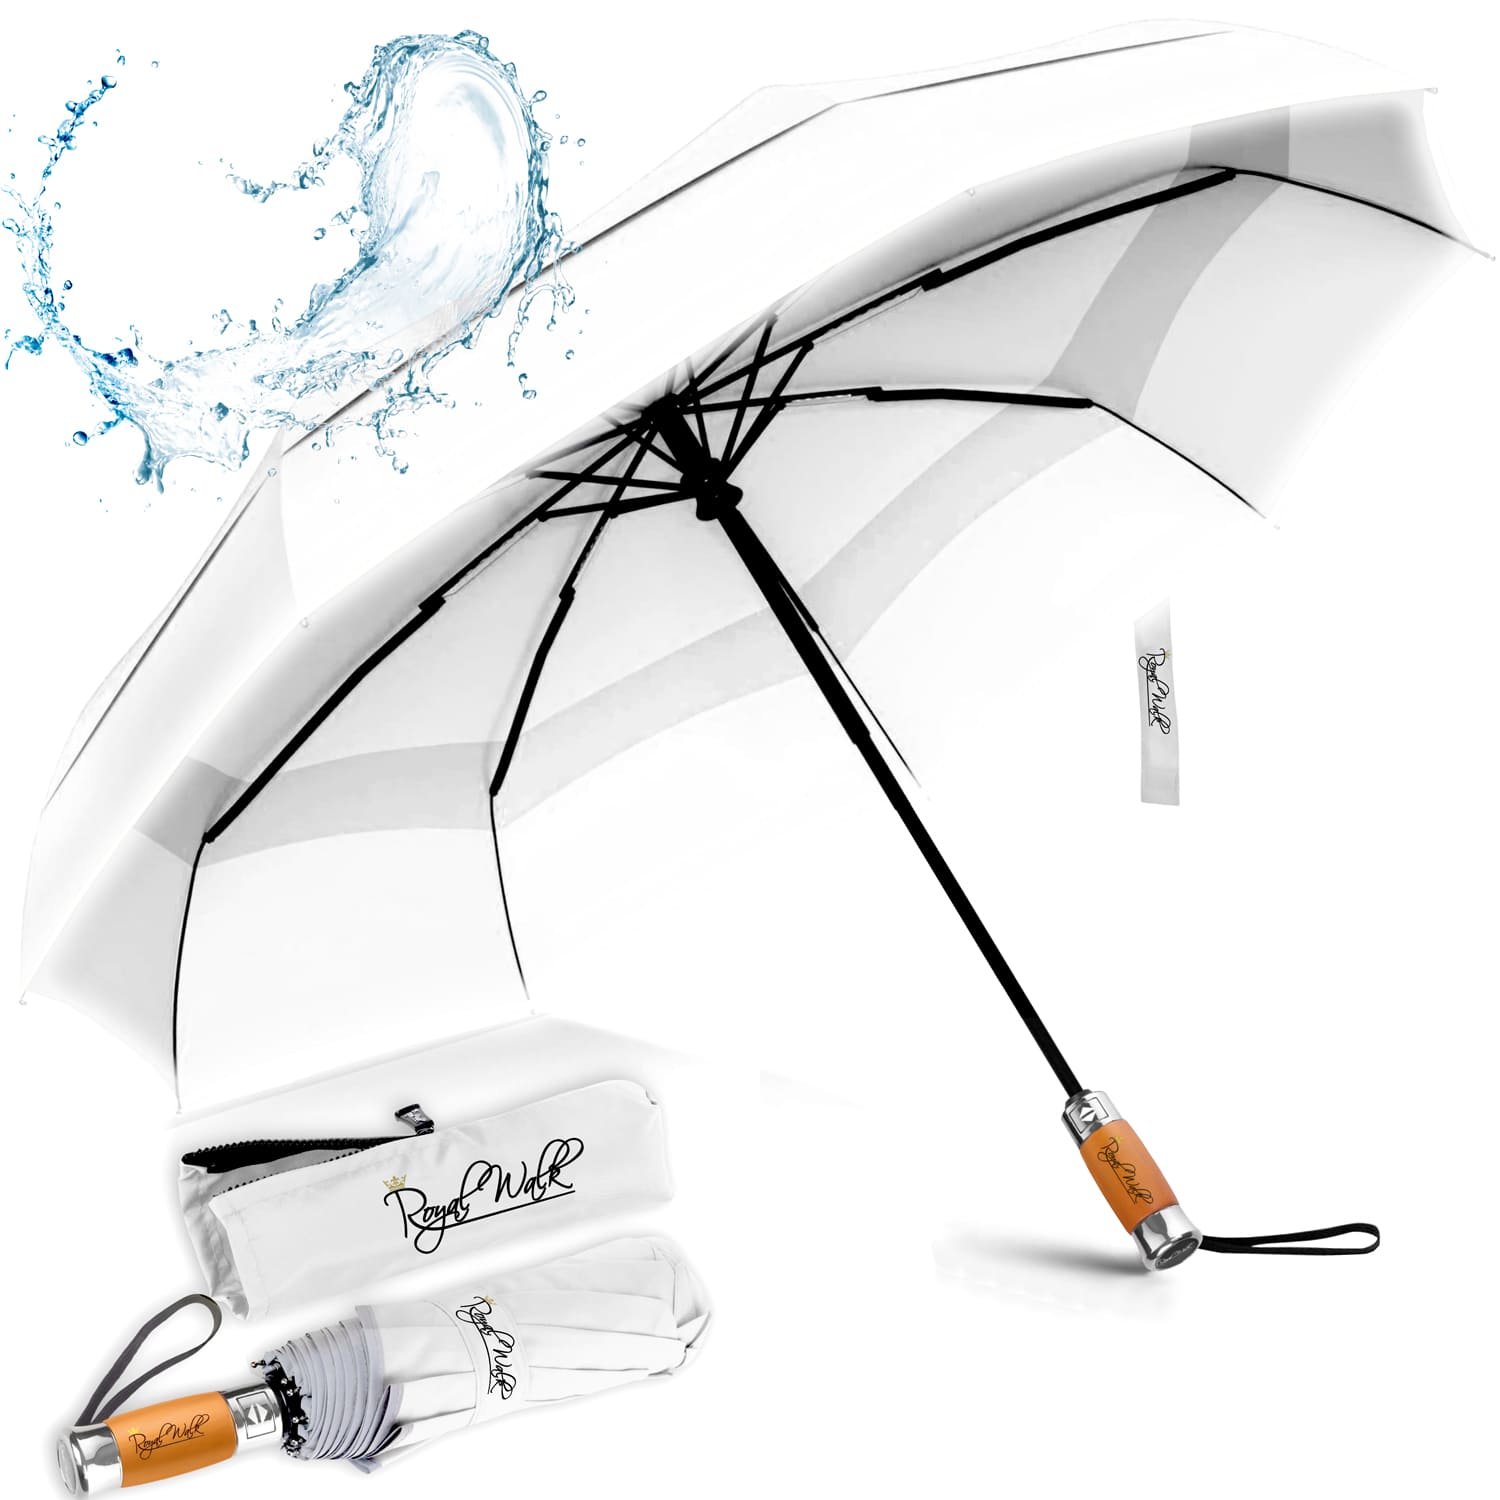 folding windproof umbrella for rain compact vented double canopy wood handle automatic open close 41 inch 103 cm white 30 1500